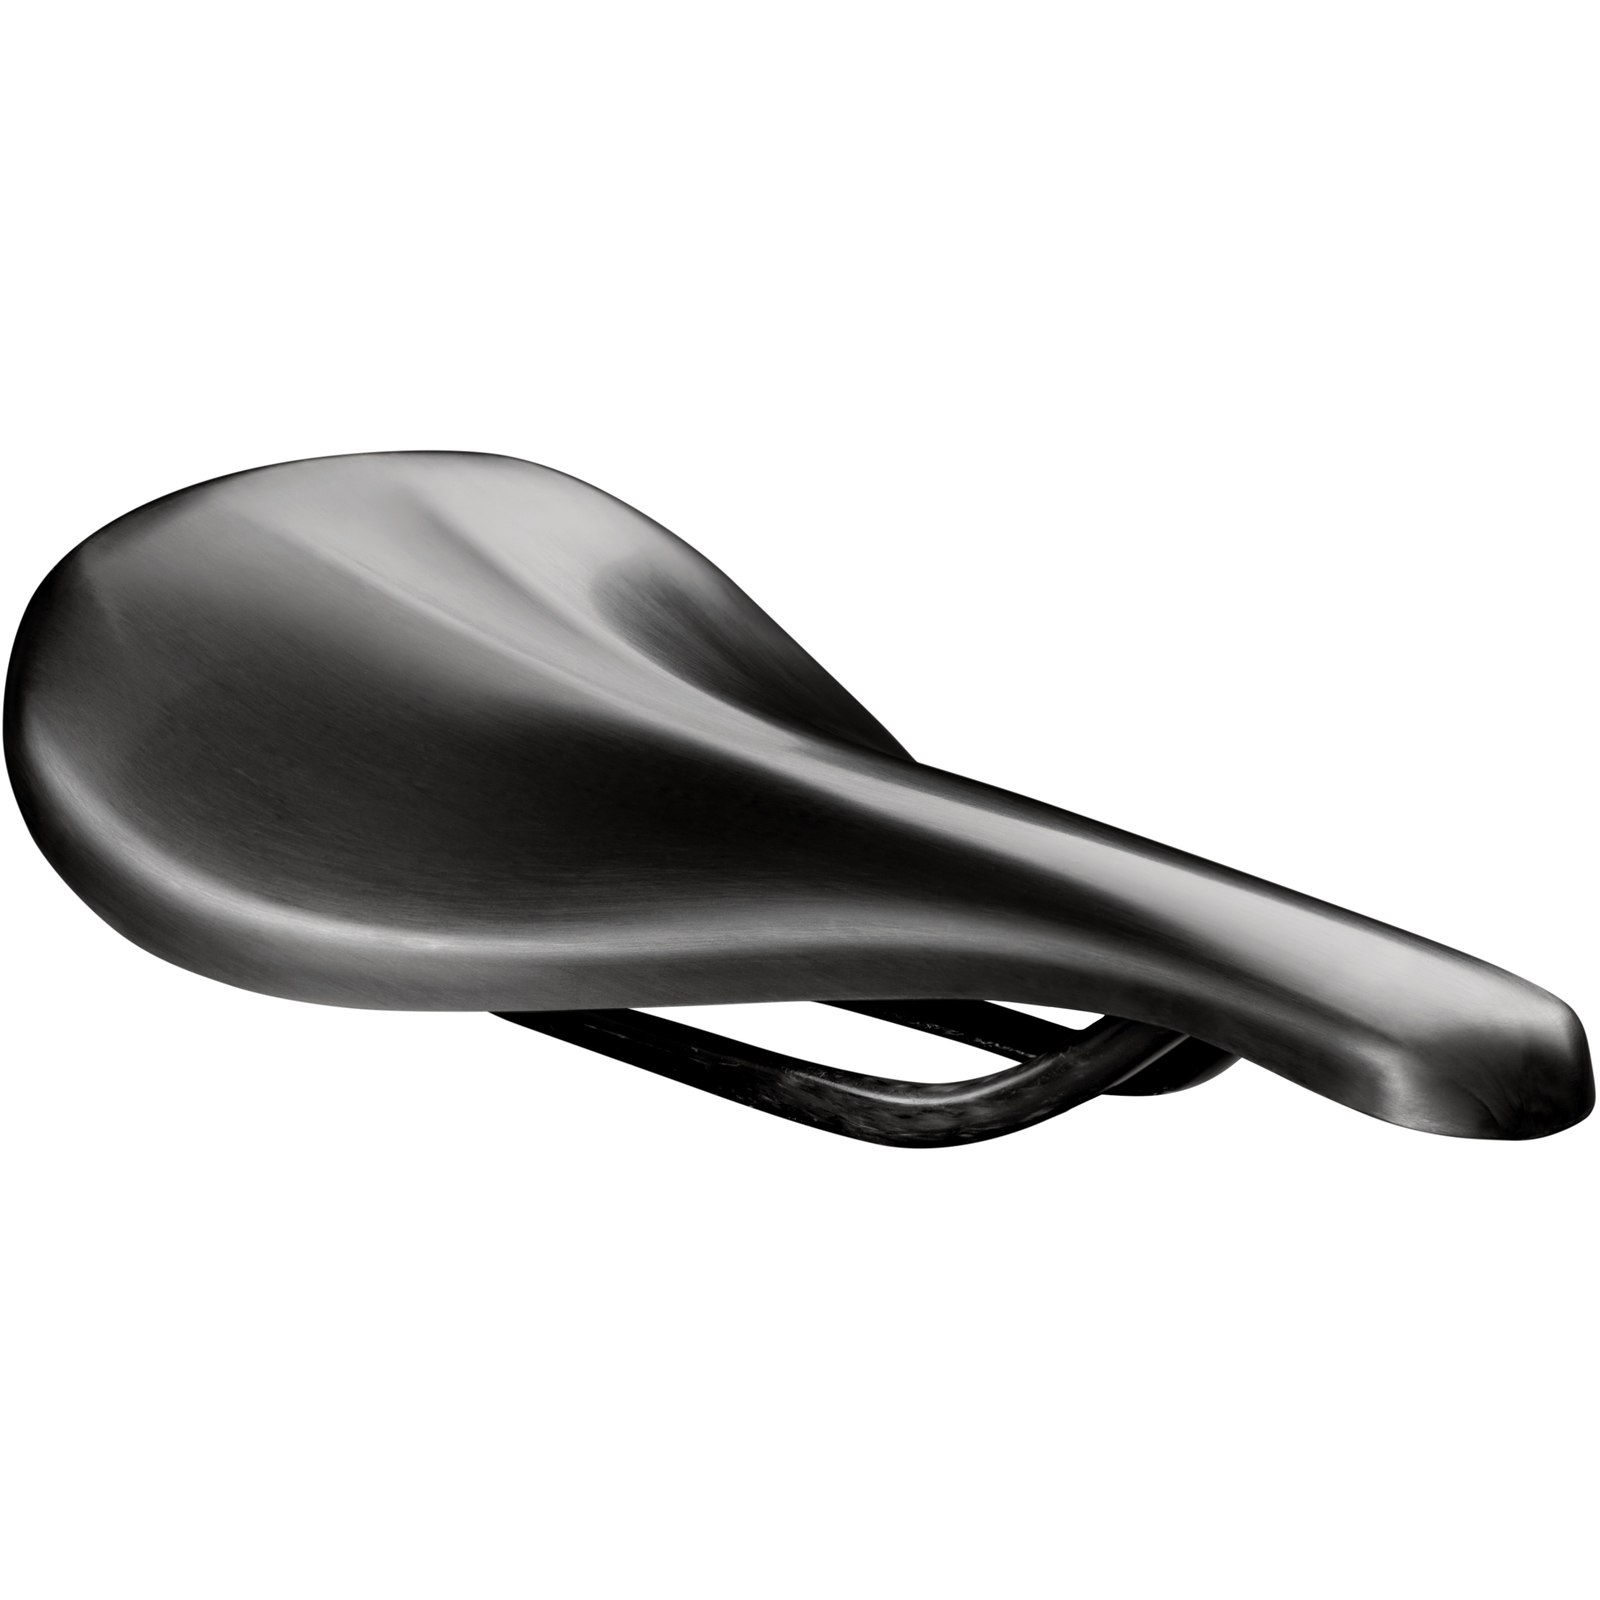 Picture of Beast Components Pure Carbon Saddle - 130mm, UD black